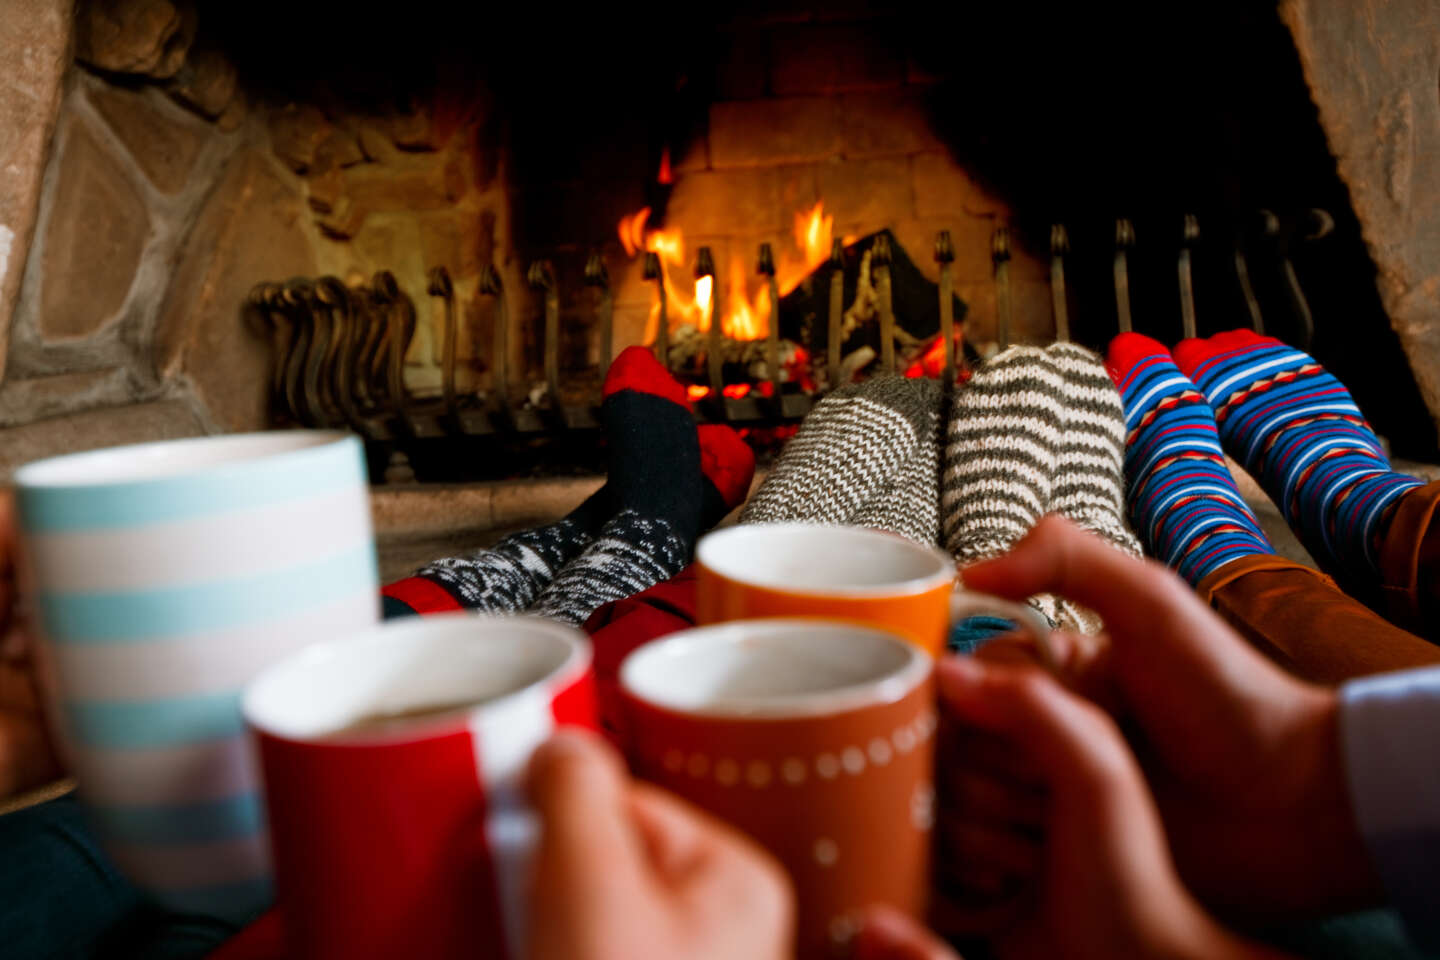 “Hygge”, the Danish recipe for happiness